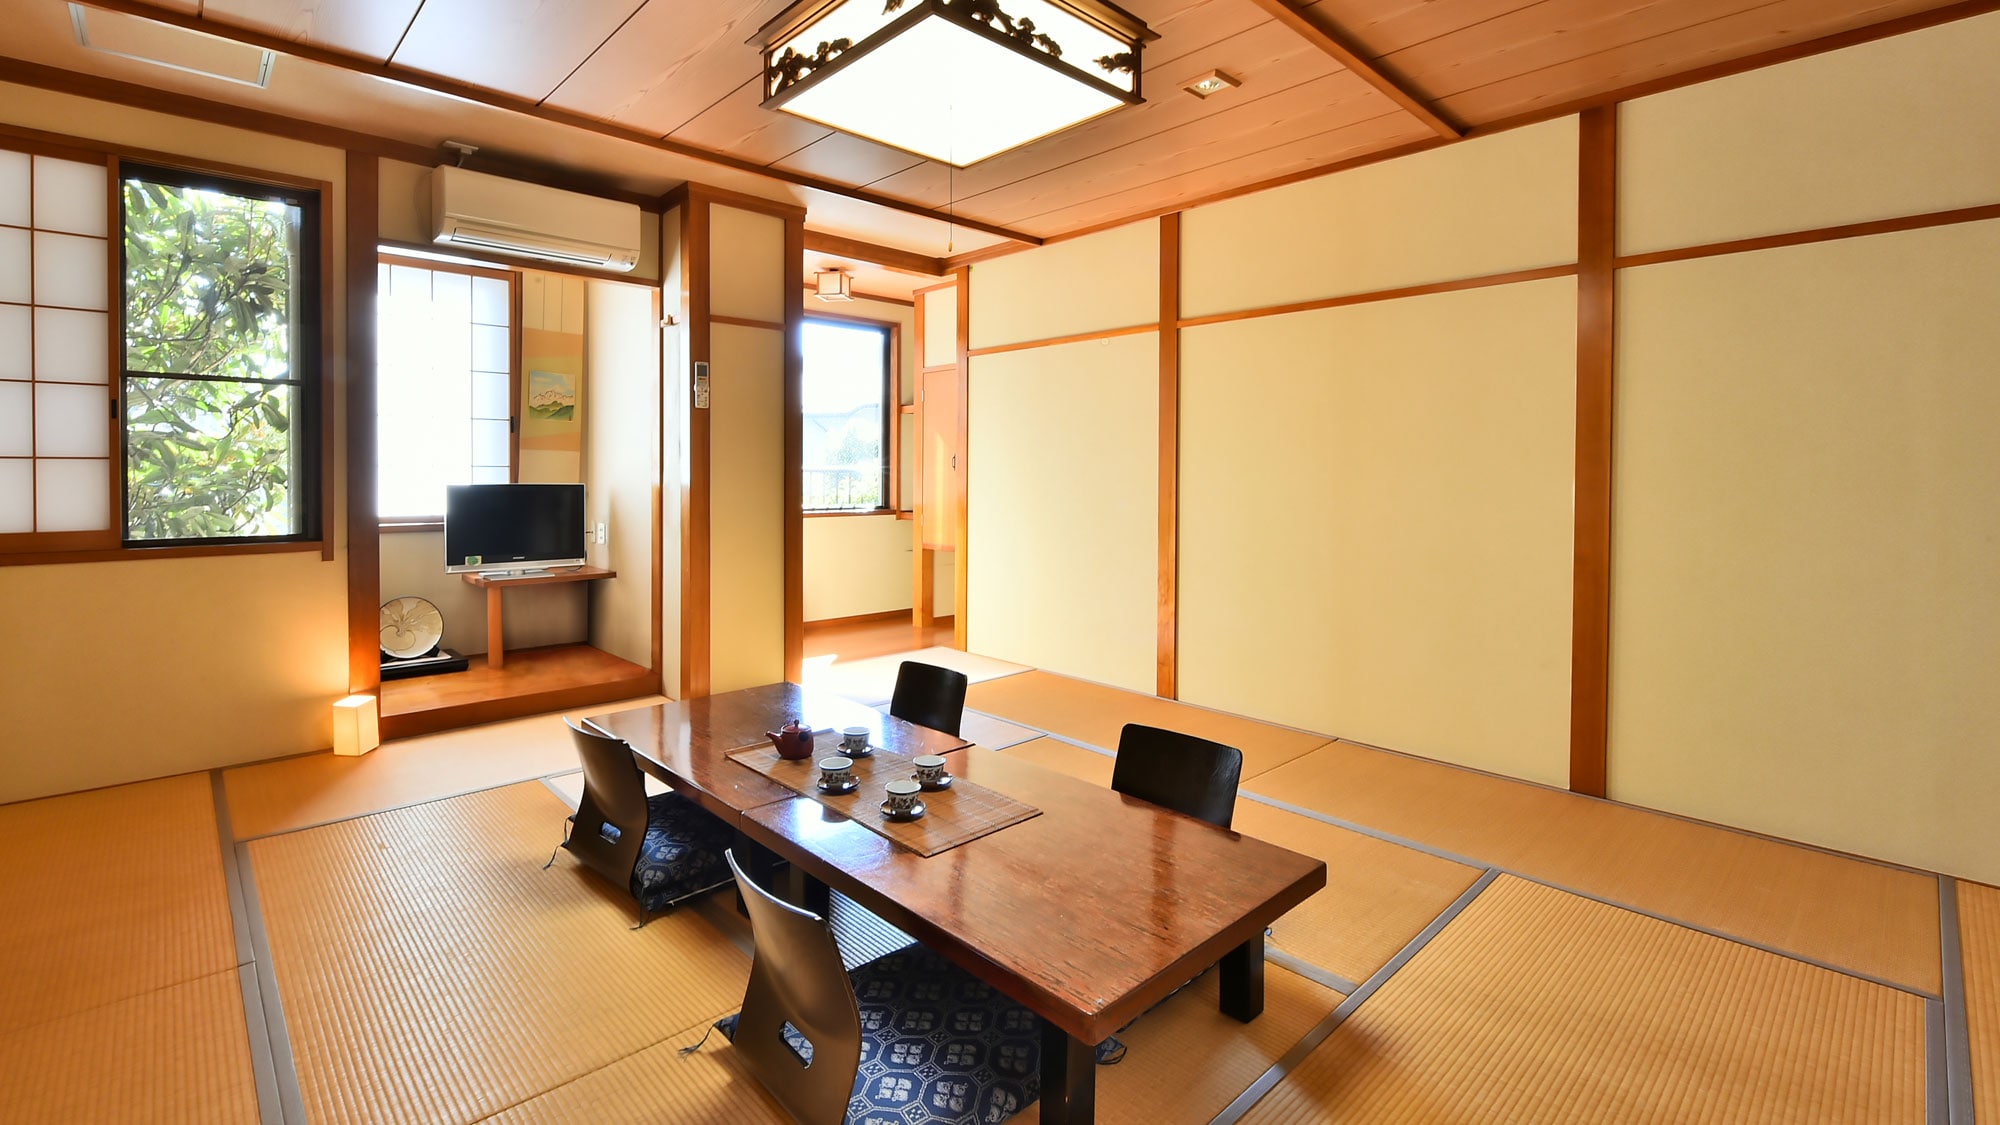 Japanese-style room with 15 tatami mats